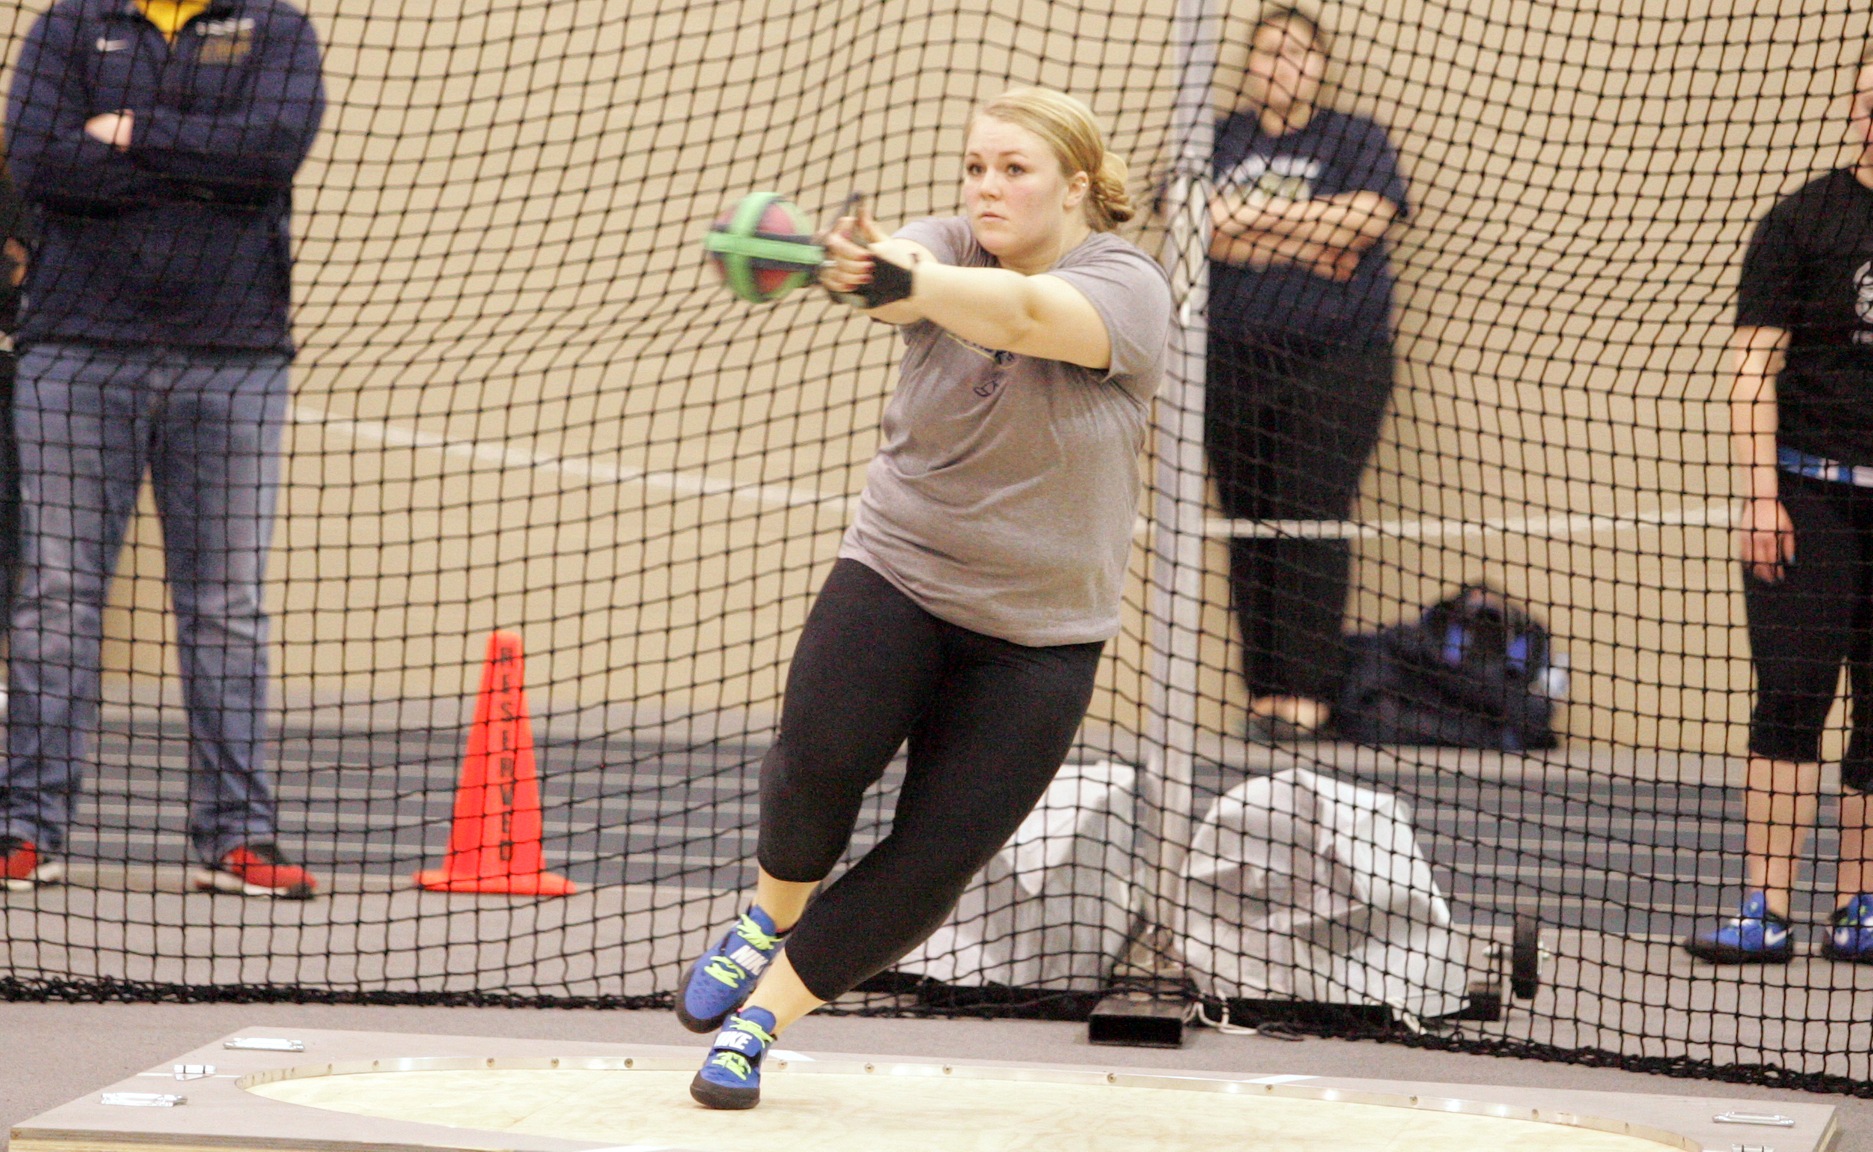 Eck Wins Two Events at ONU Qualifier